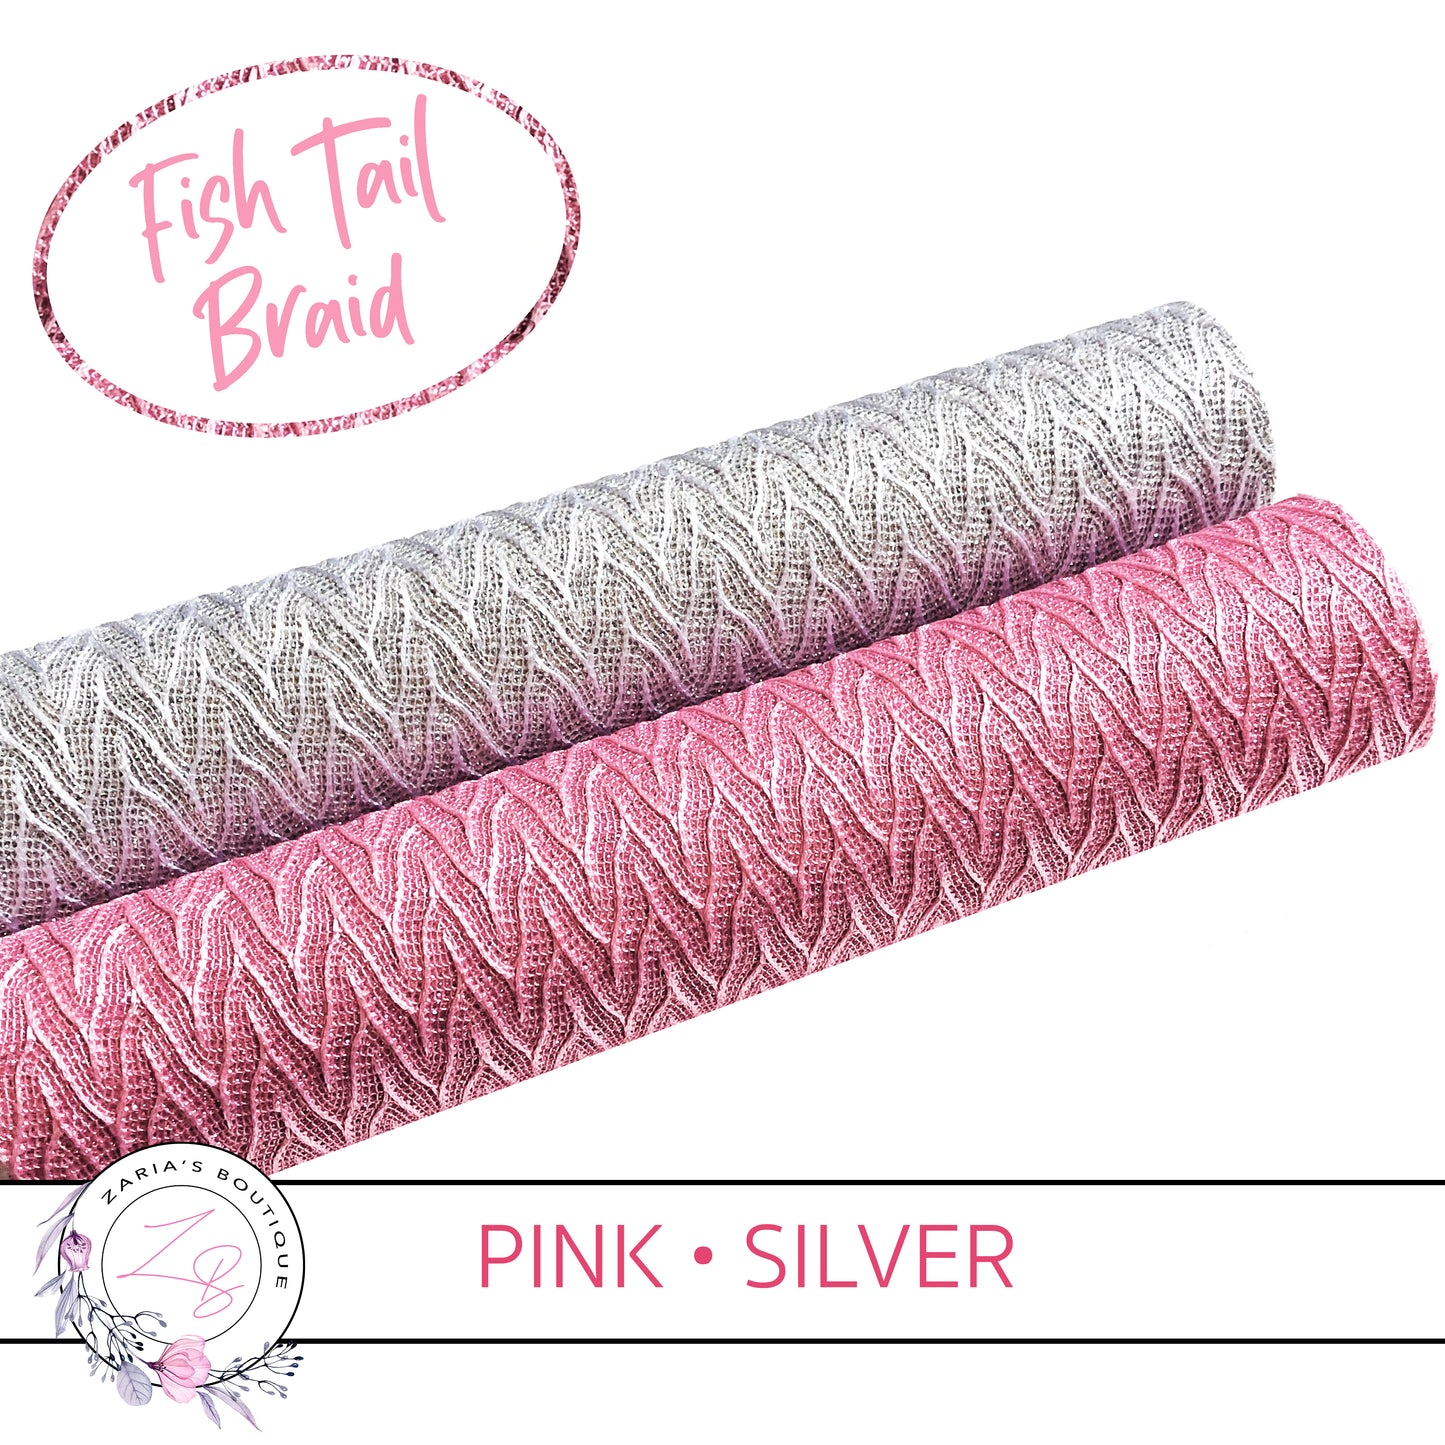 Glitter Fish Tail Braid • Pink or Silver • Textured Faux Leather